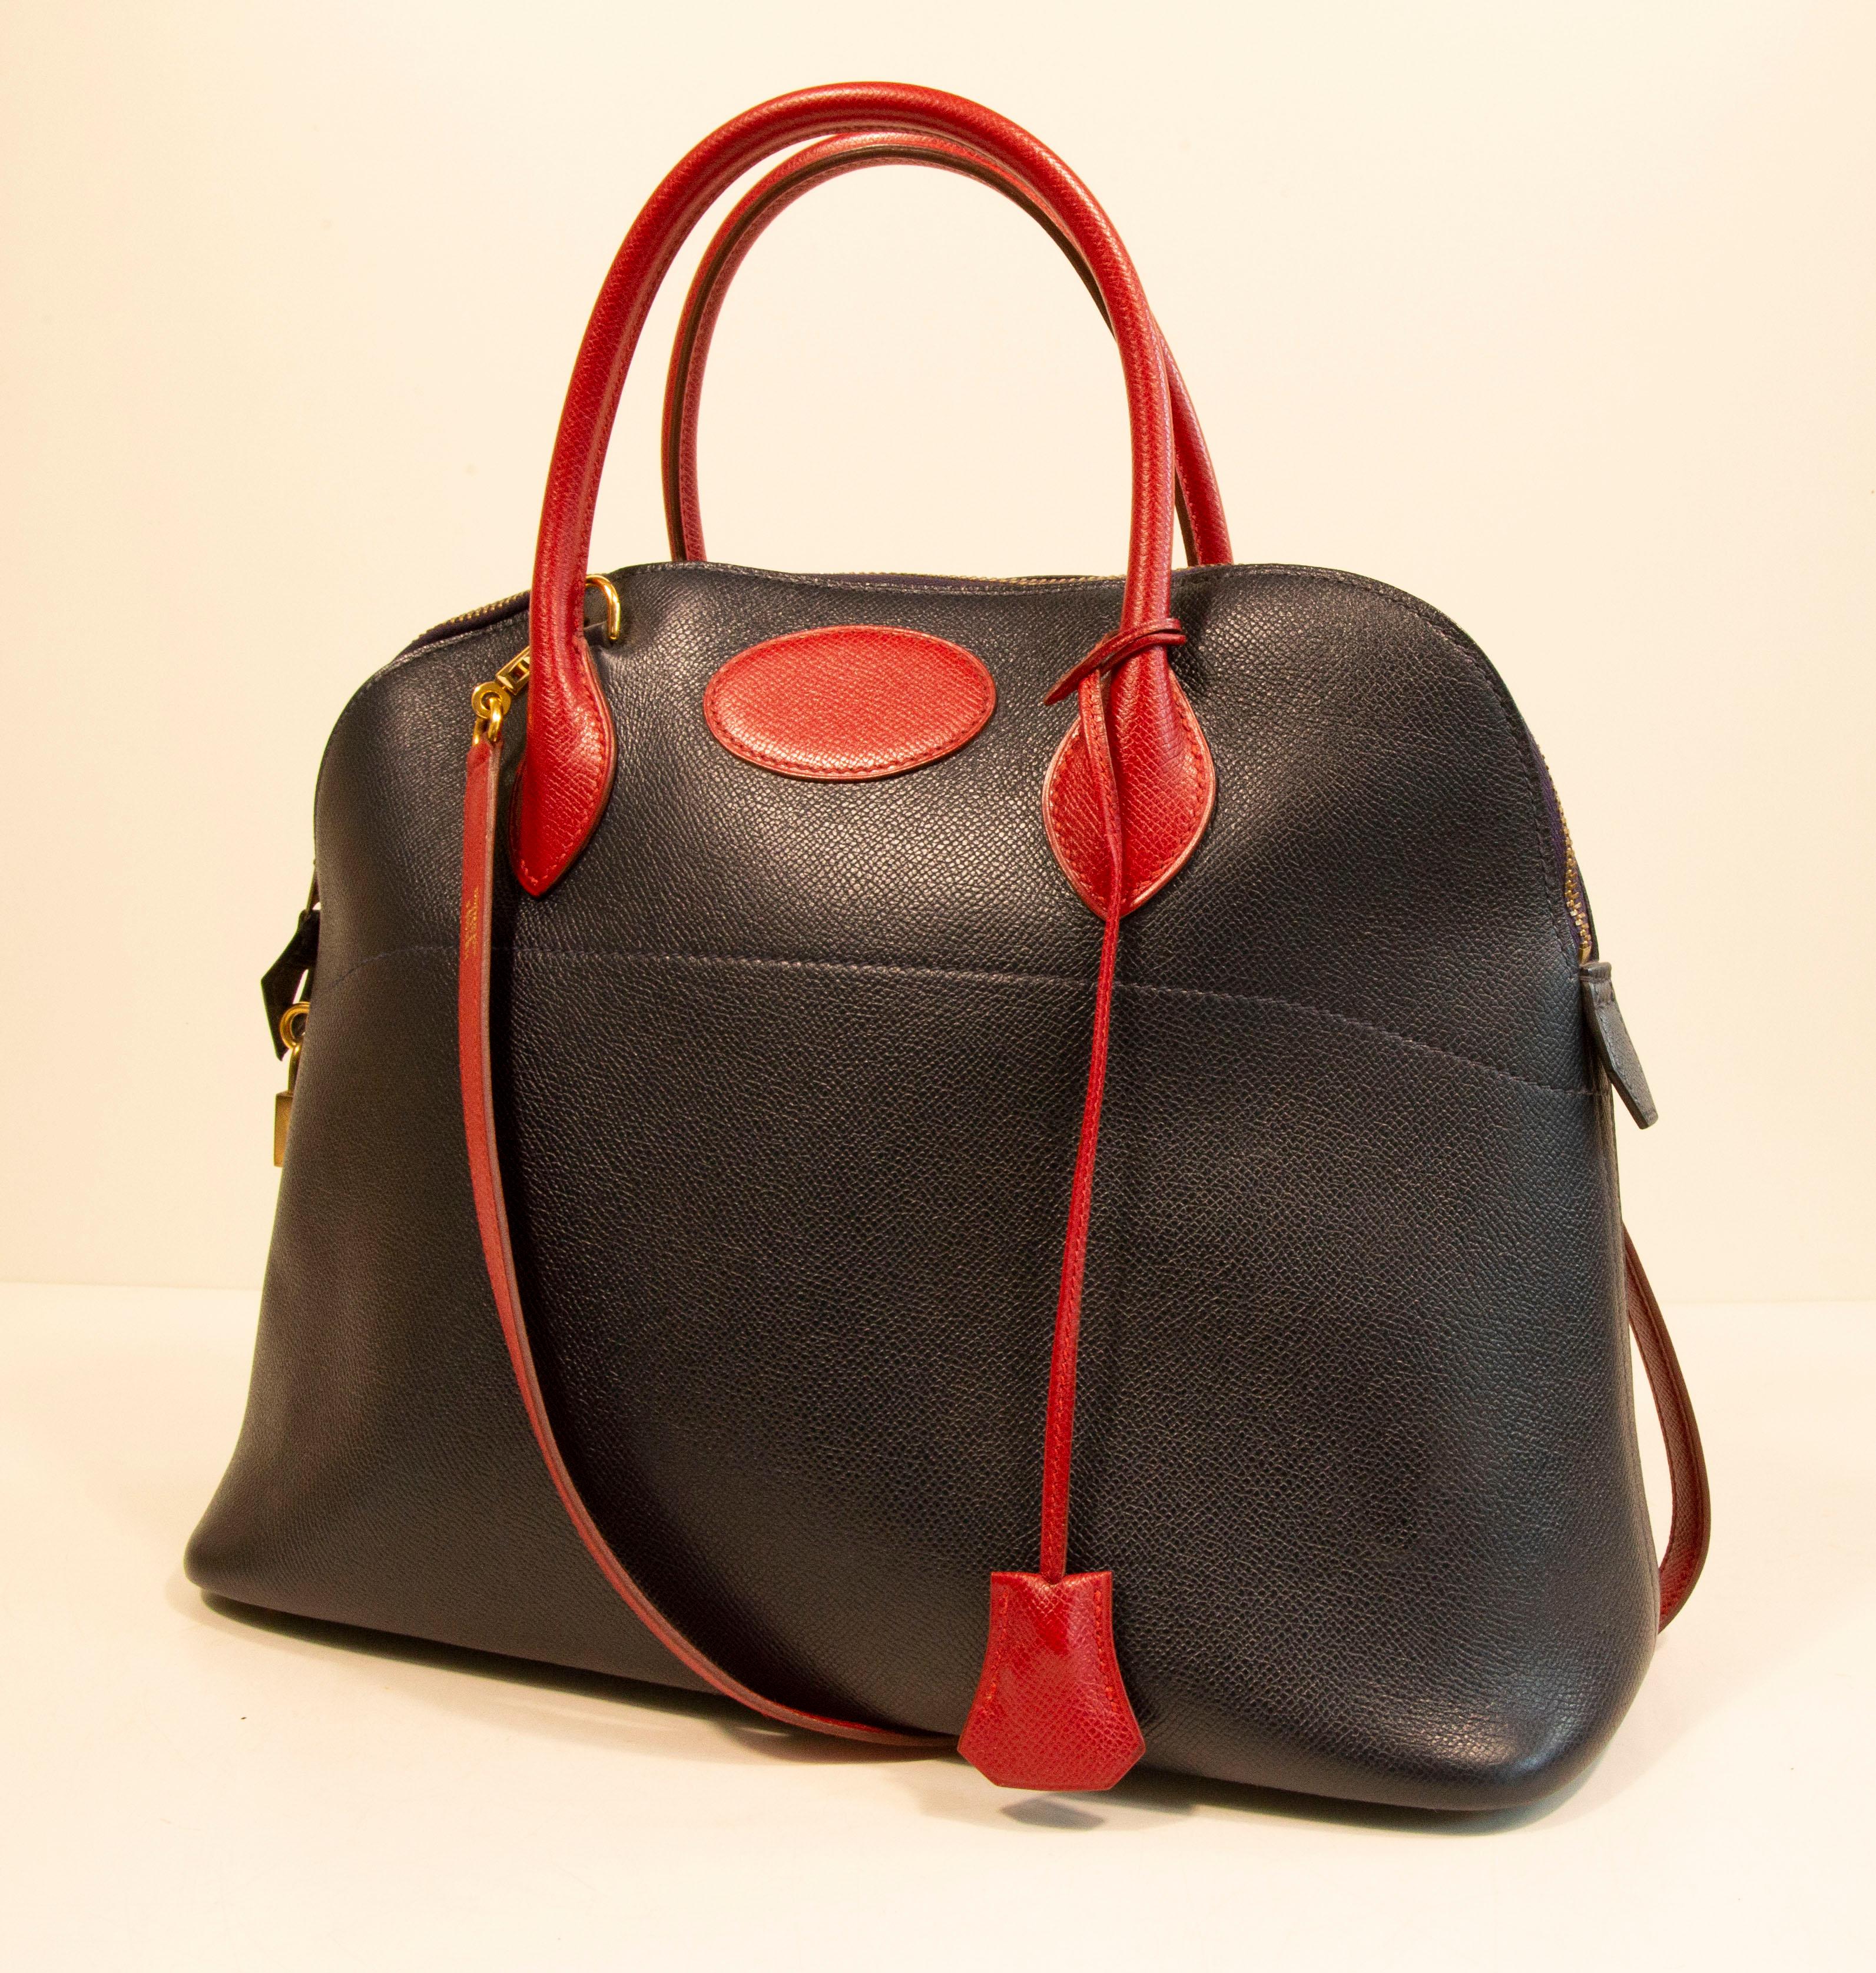 Hermes Bolide 35 handbag made of textured navy blue leather with red leather finish. The hardware is gold toned. The interior is lined with smooth navy blue leather. The interior consists of one major compartment   with one slide pocket. 
The bag